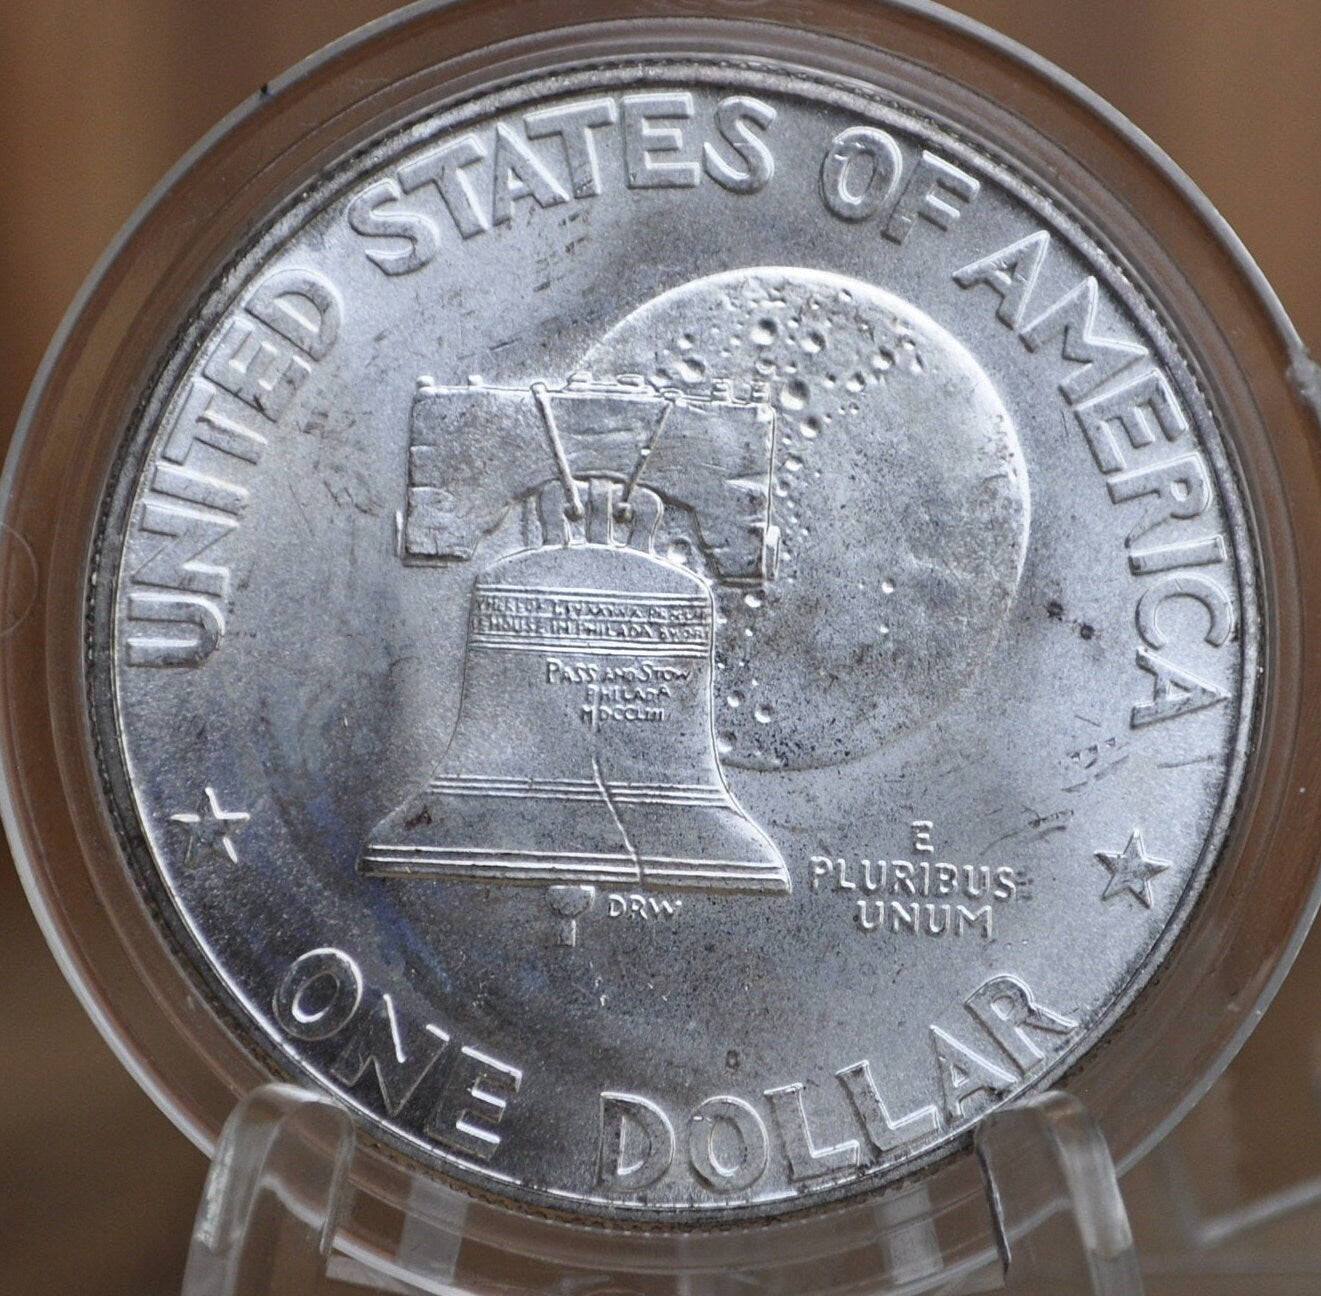 1971-1978 Eisenhower Silver and Clad Dollars - BU (Uncirculated), Proofs - Choose by Date & Type, 1971-S Eisenhower Silver Dollar